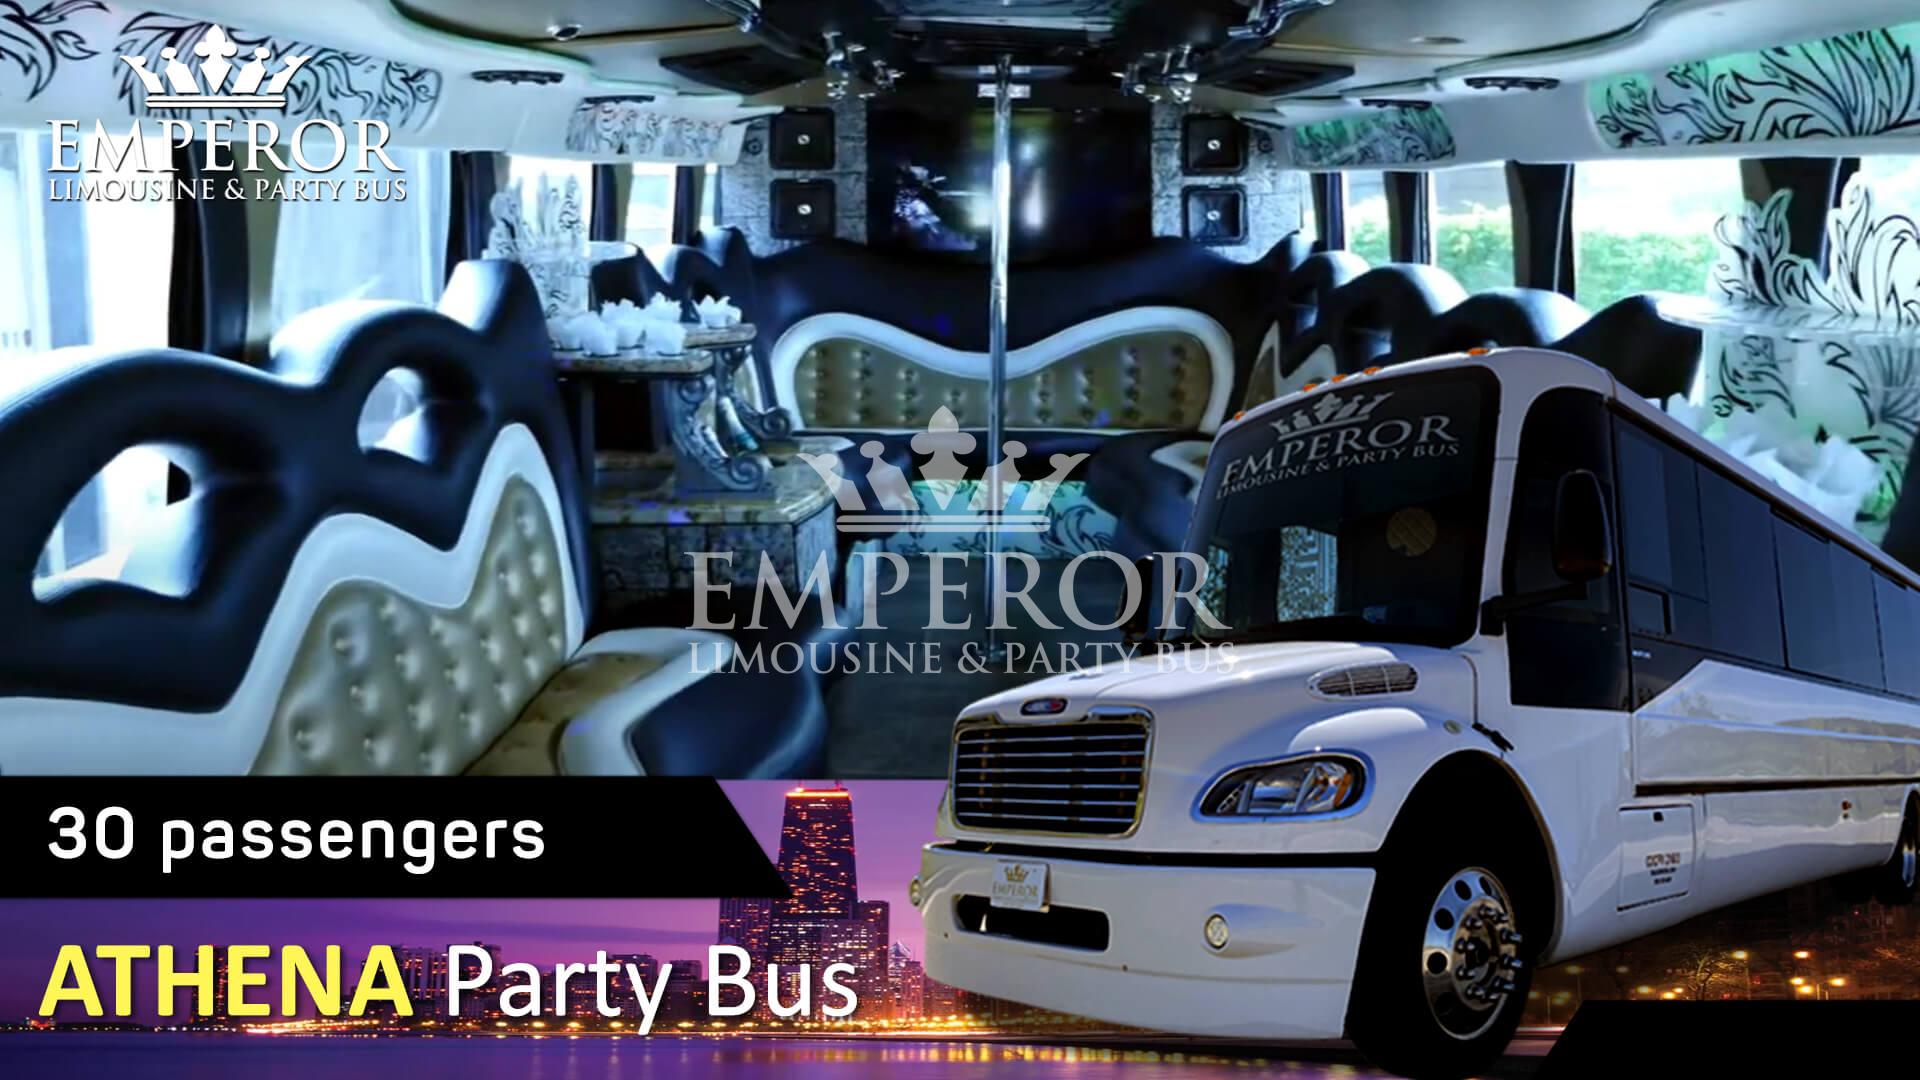 Corporate party bus rental in Chicago - Athena edition